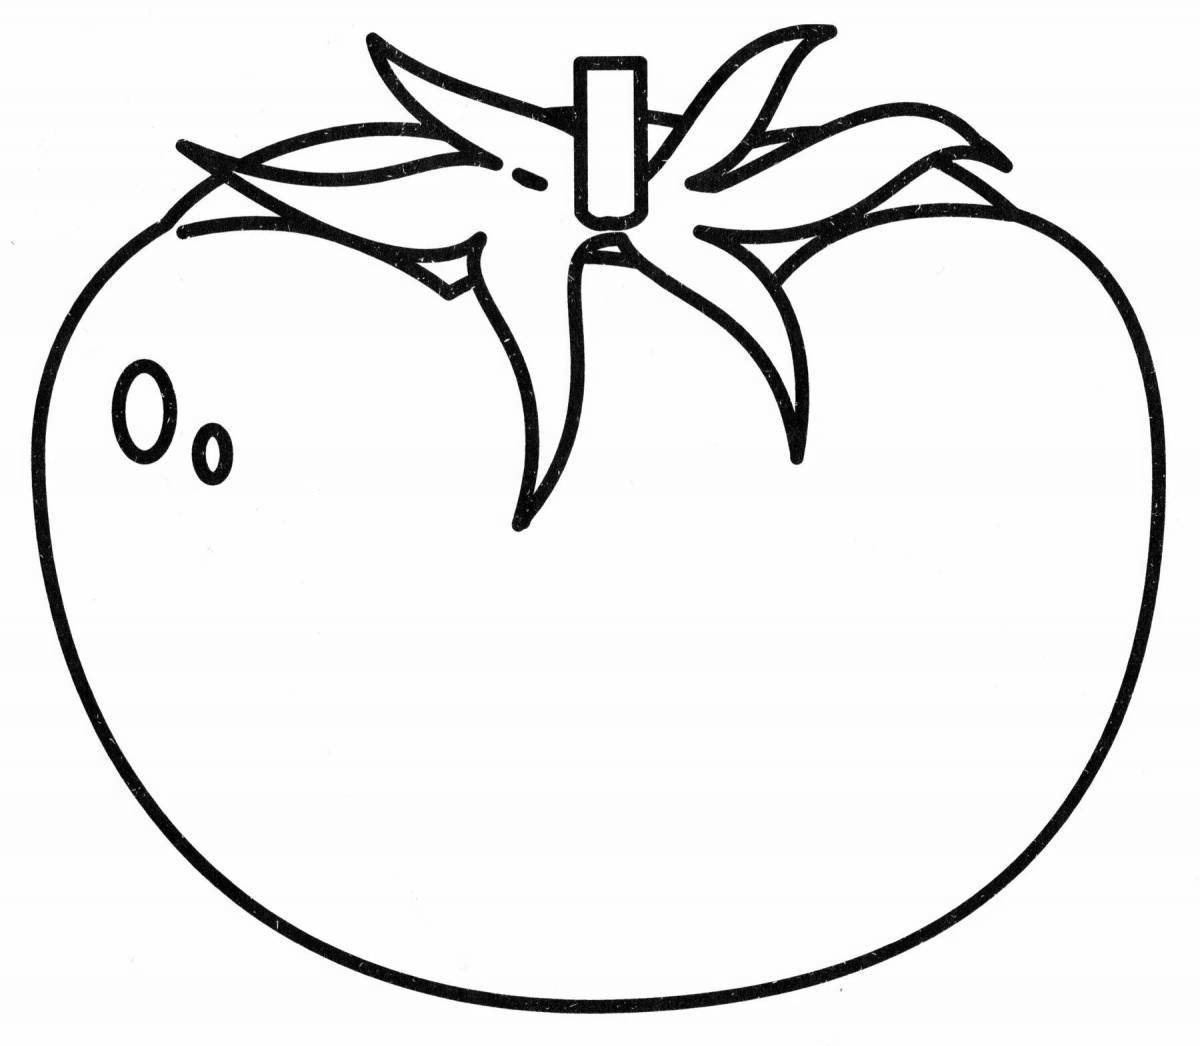 Color-frenzy tomato coloring page for children 2-3 years old